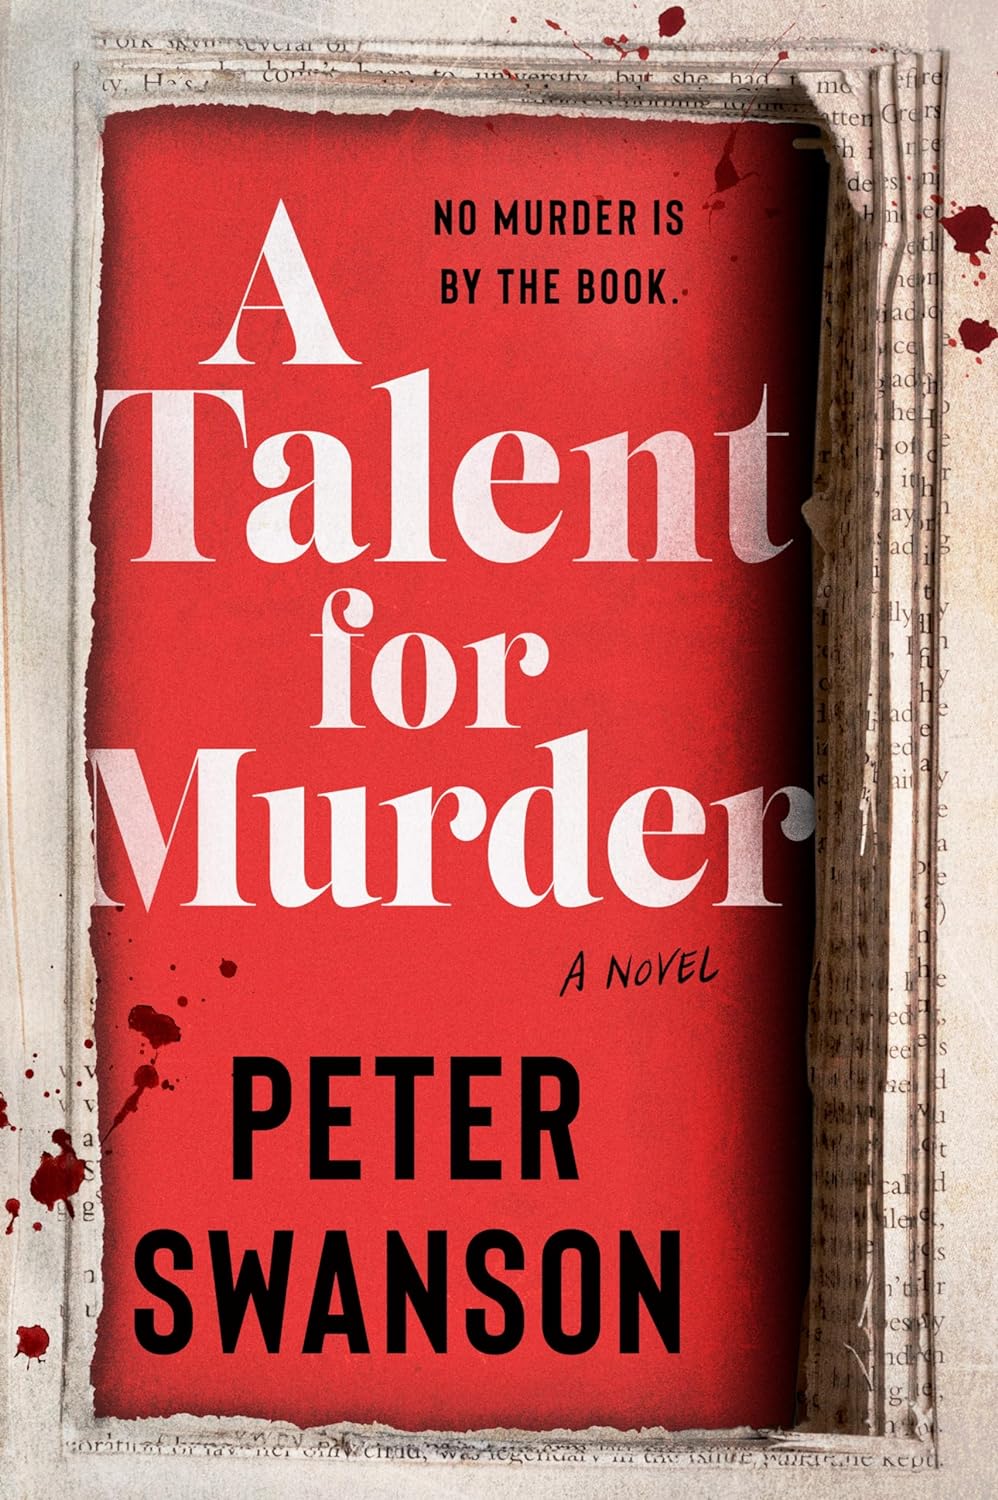 Image for "A Talent for Murder"